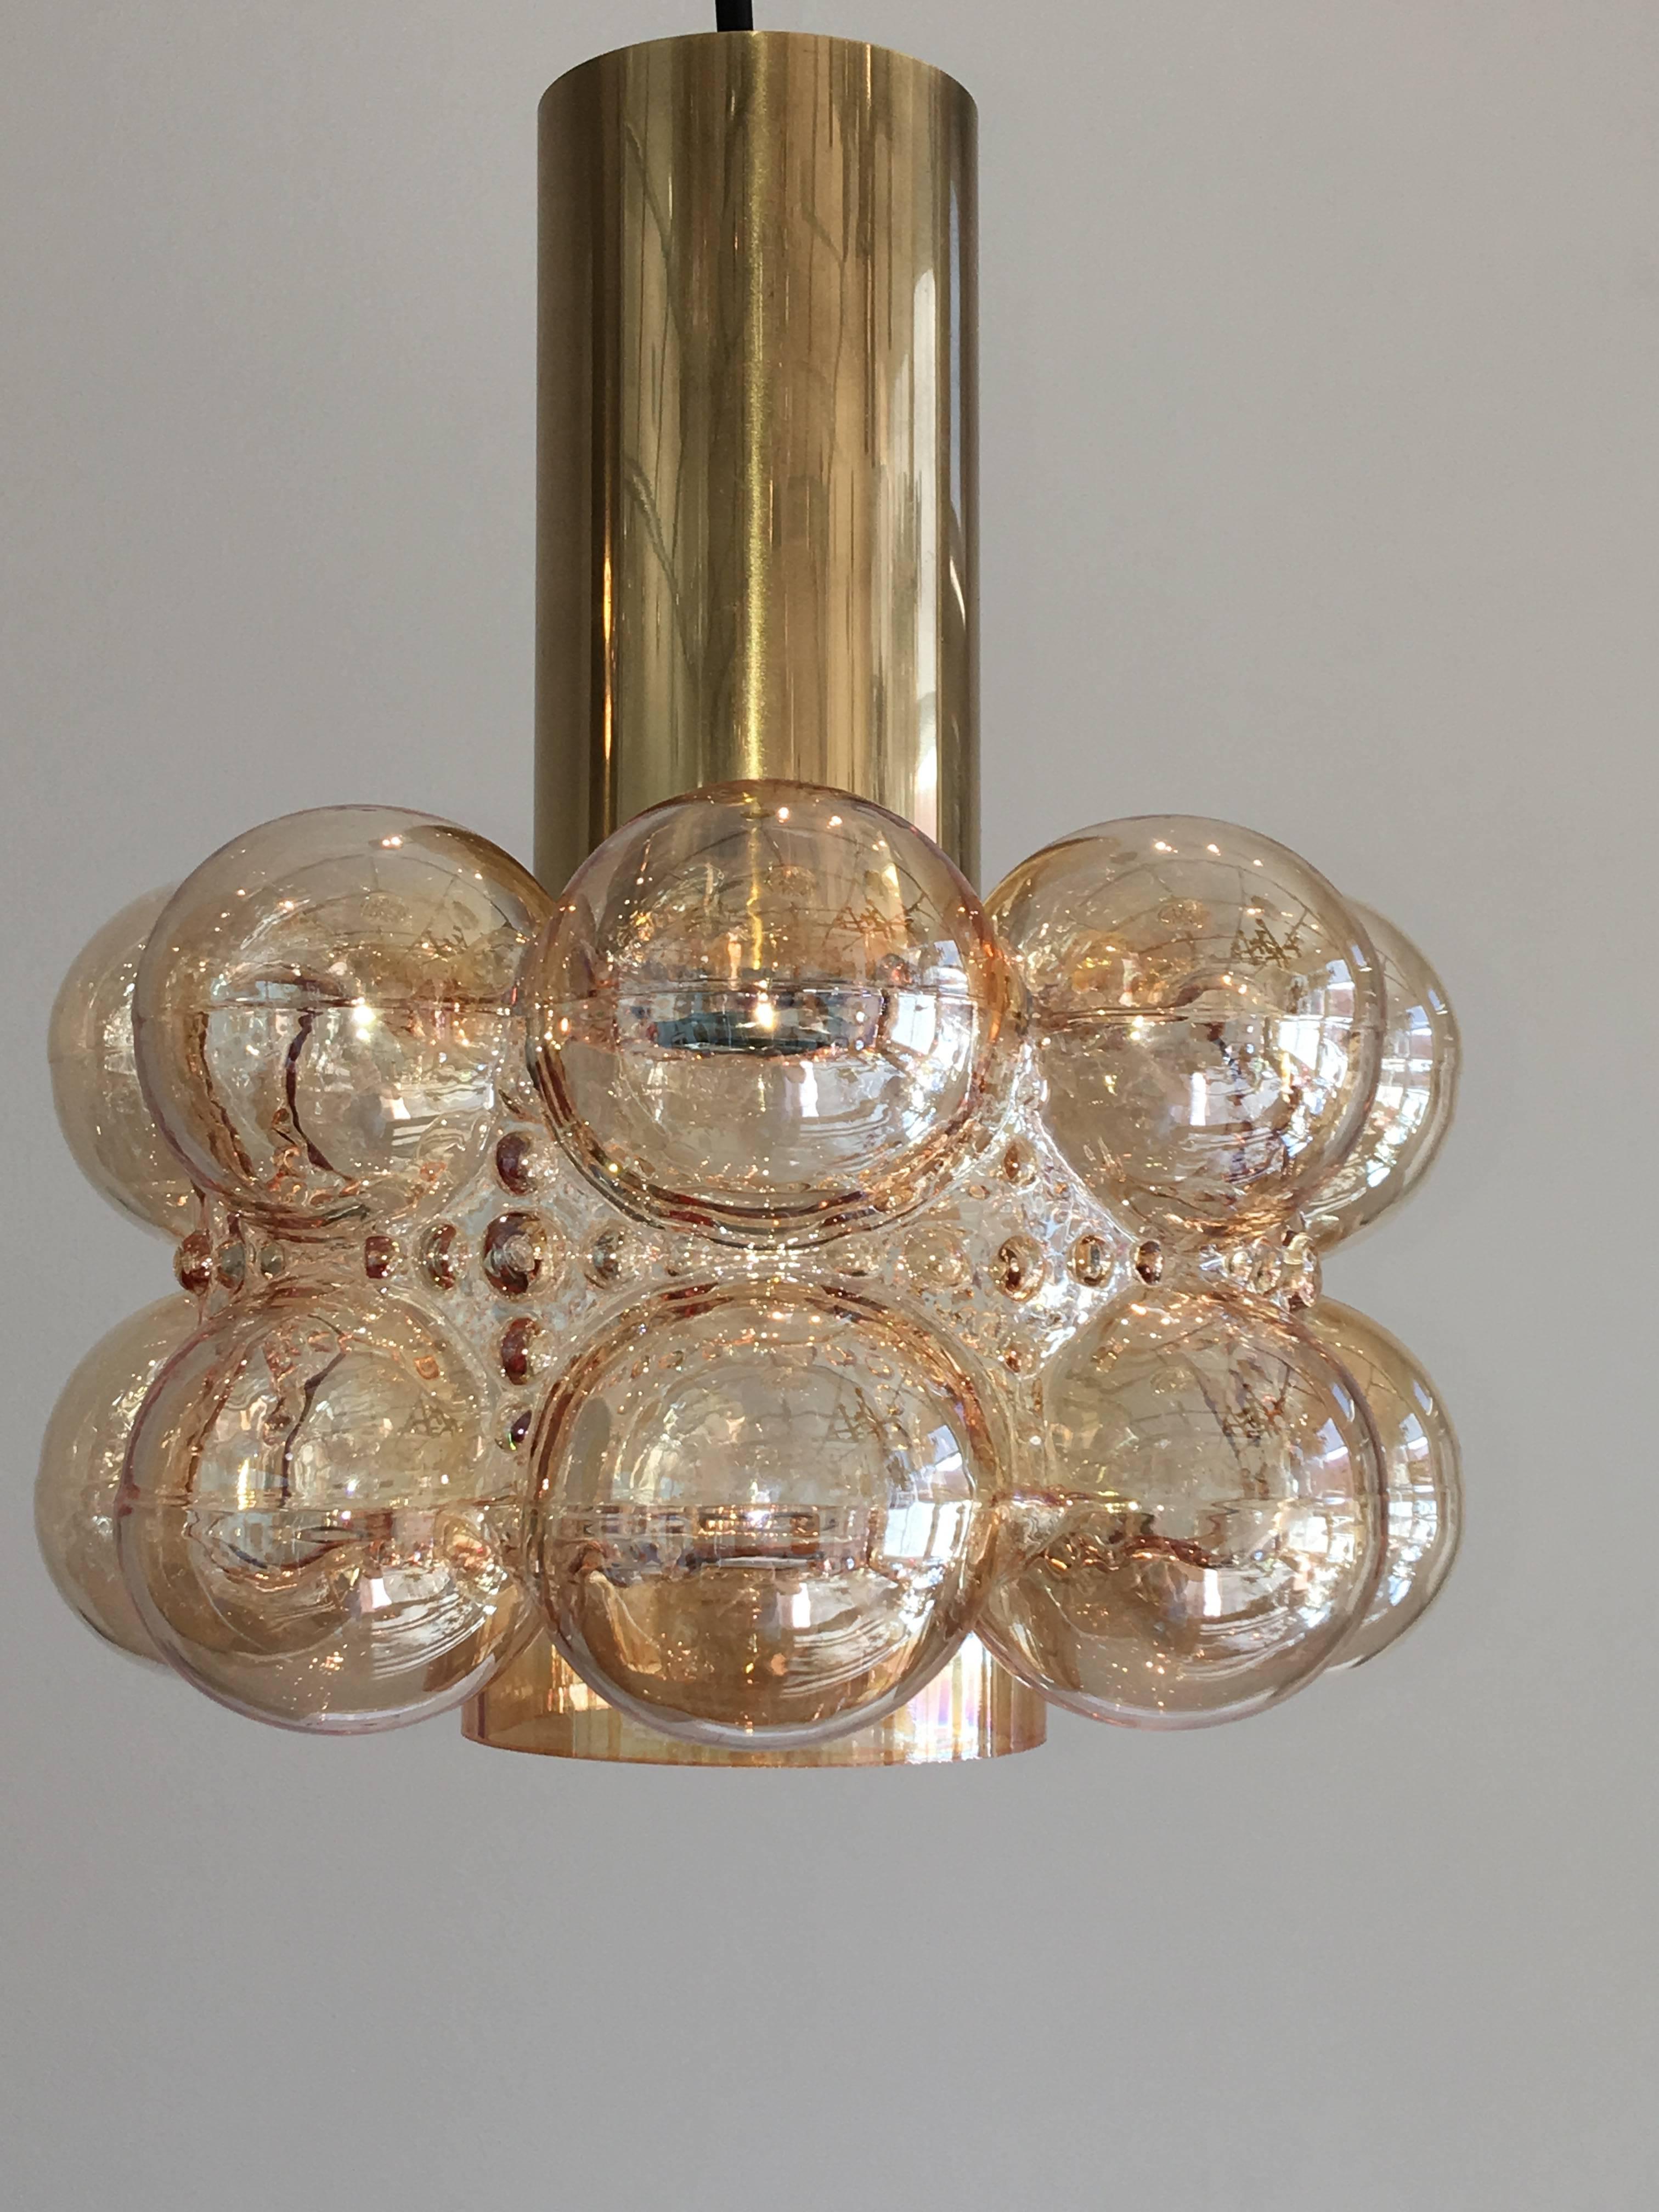 A beautiful German Limburg brass and bubble glass pendant by Helena Tynell. The fixture requires one European E27 Edison or medium bulb with up to 60 watts.